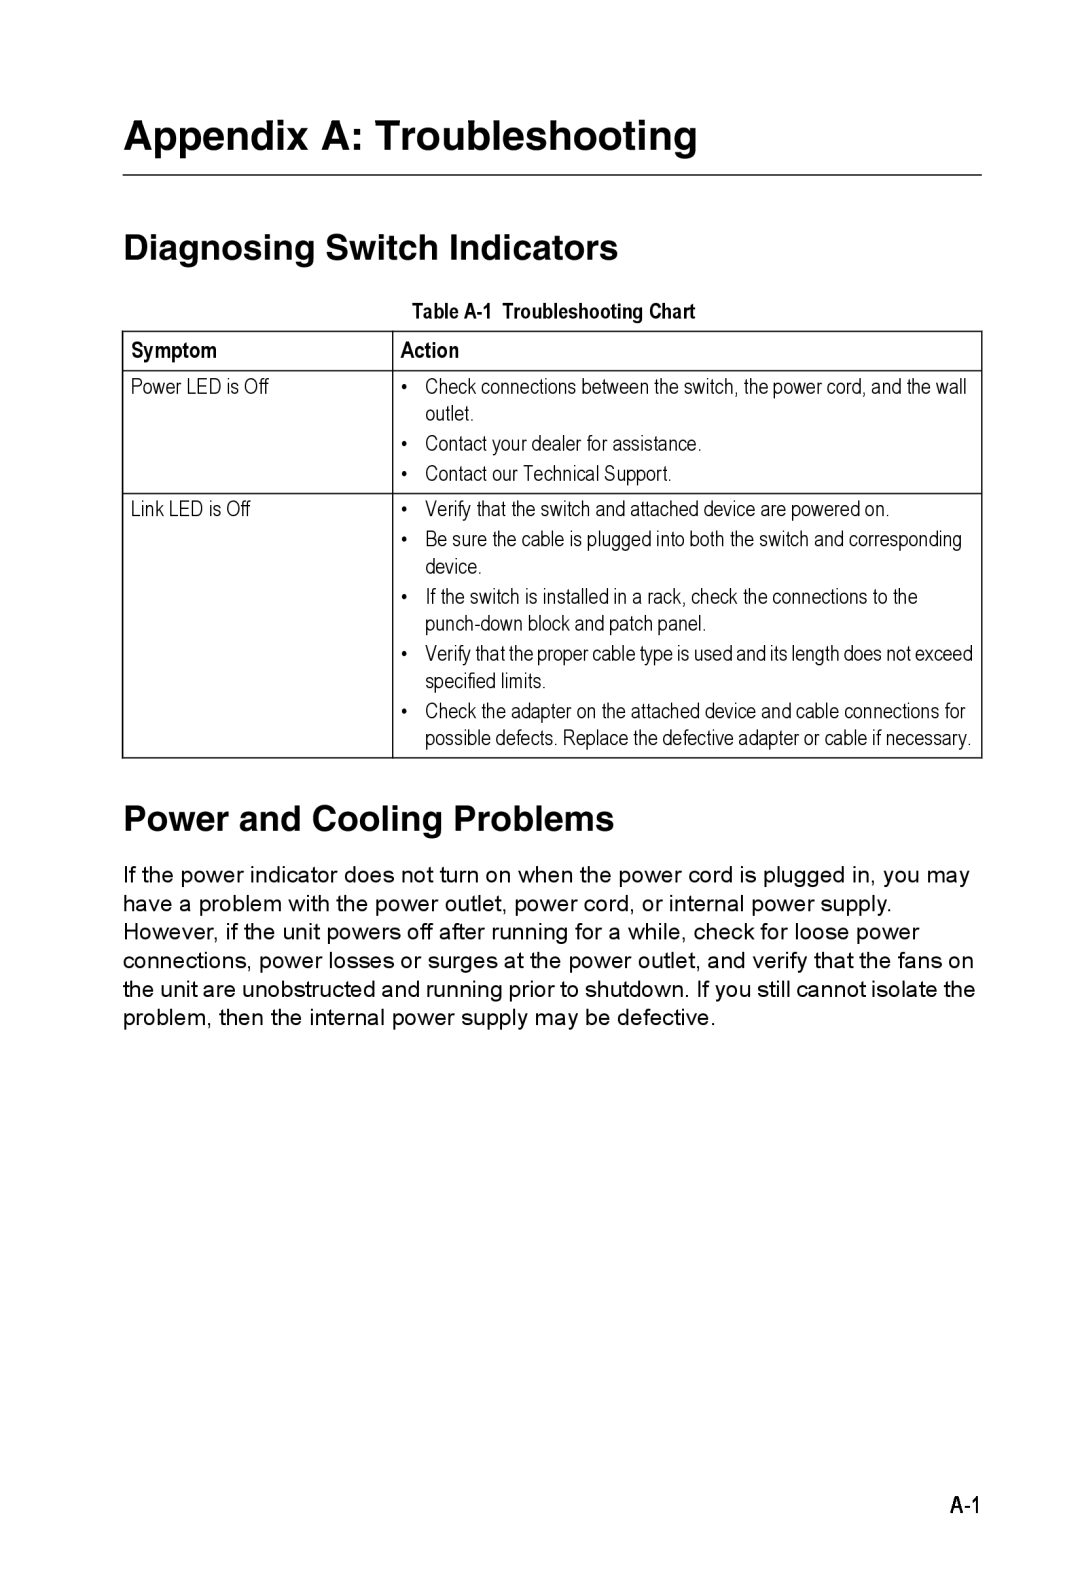 Accton Technology ES4324 manual Appendix A Troubleshooting, Diagnosing Switch Indicators, Power and Cooling Problems 